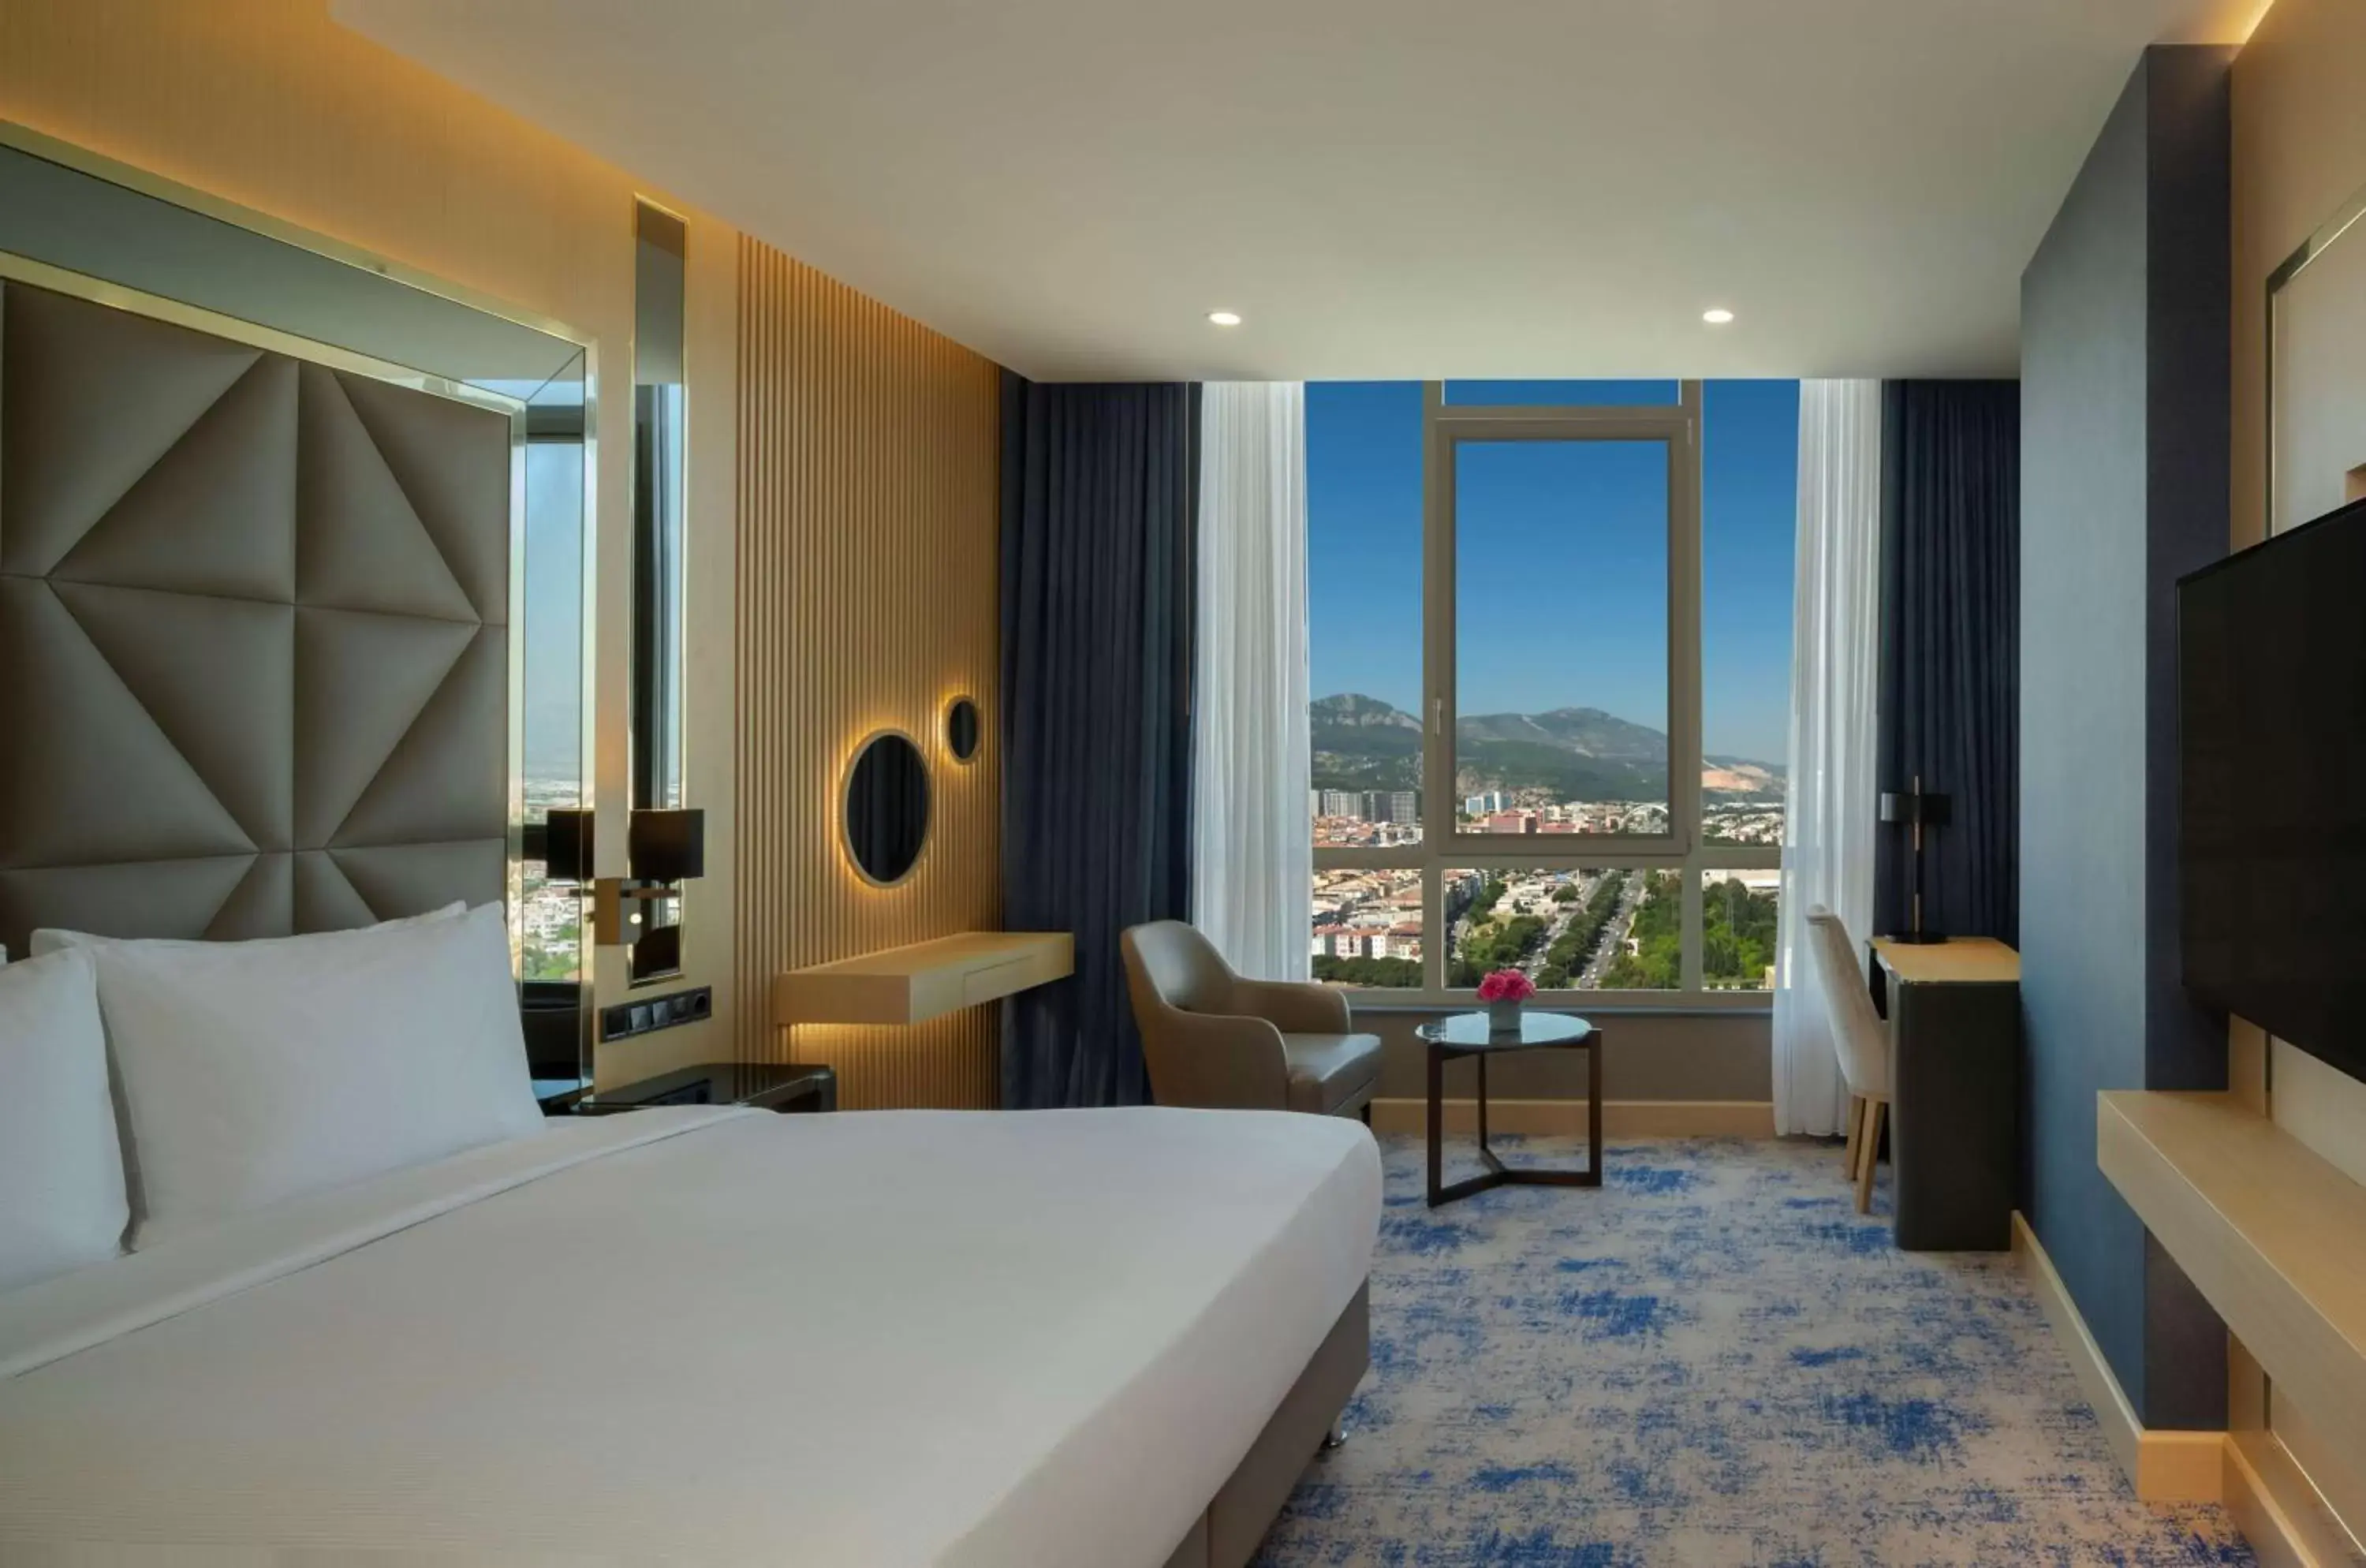 Bedroom in DoubleTree by Hilton Manisa